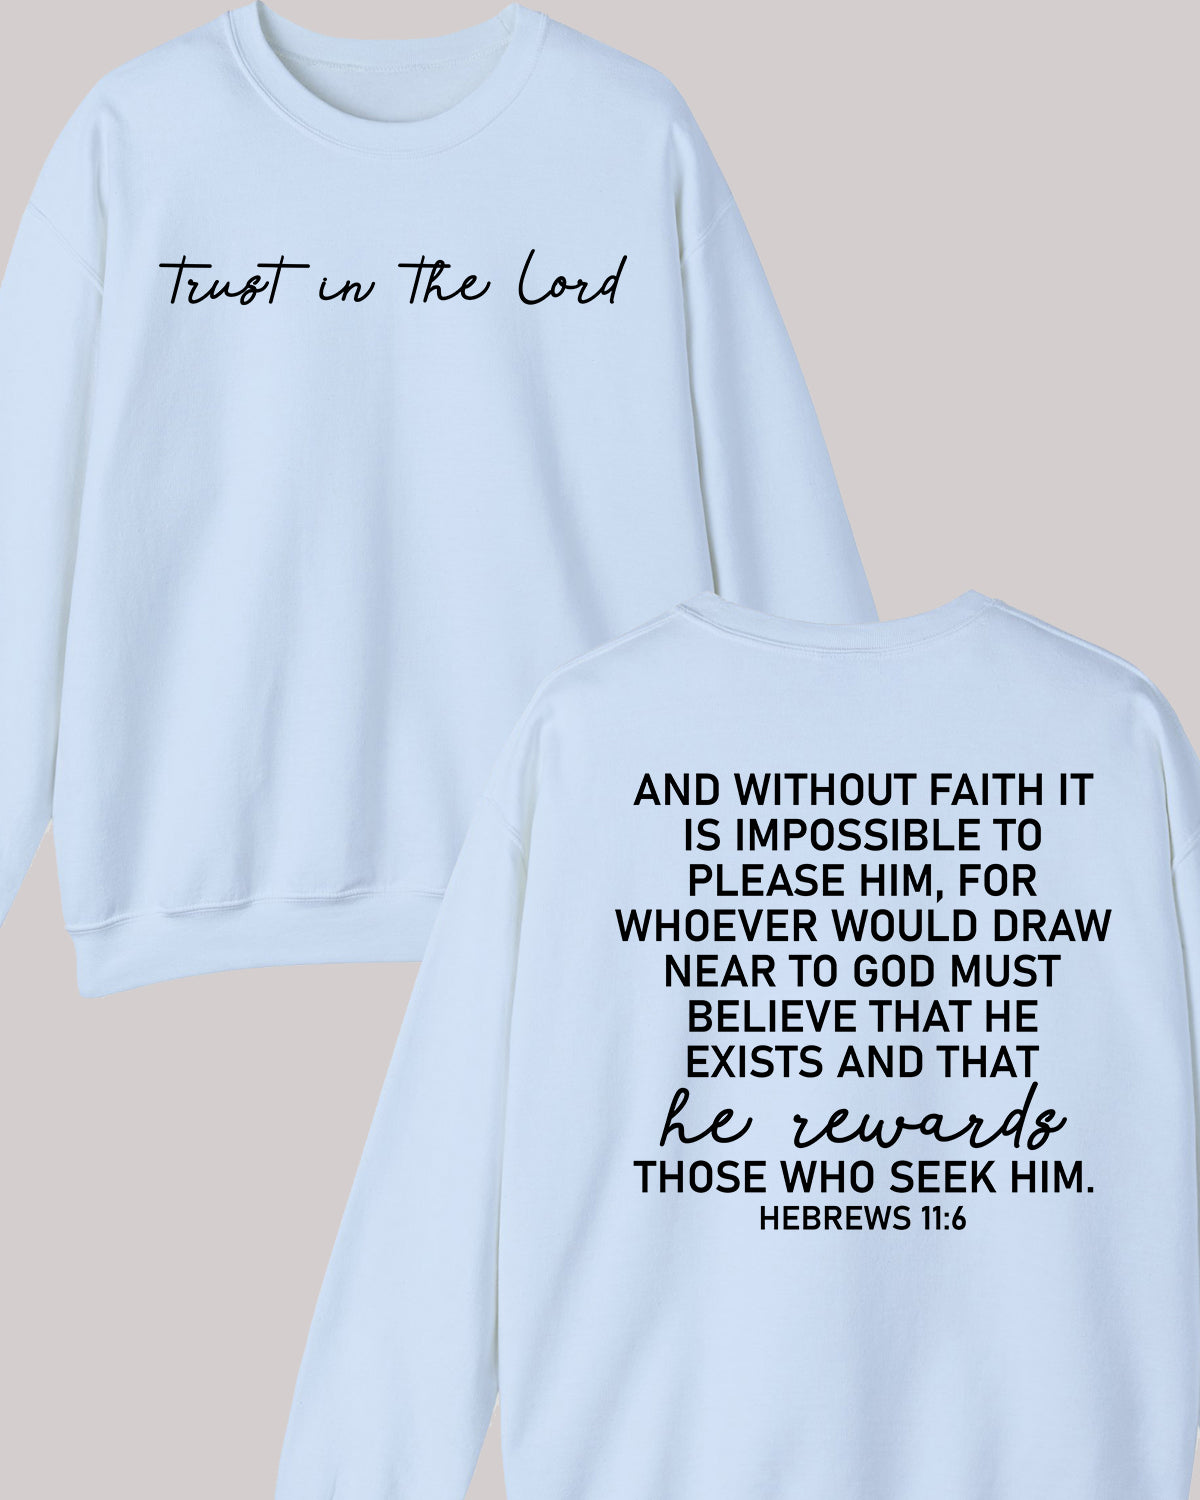 Trust In The Lord Humorous Christian Sweatshirts Front back Print